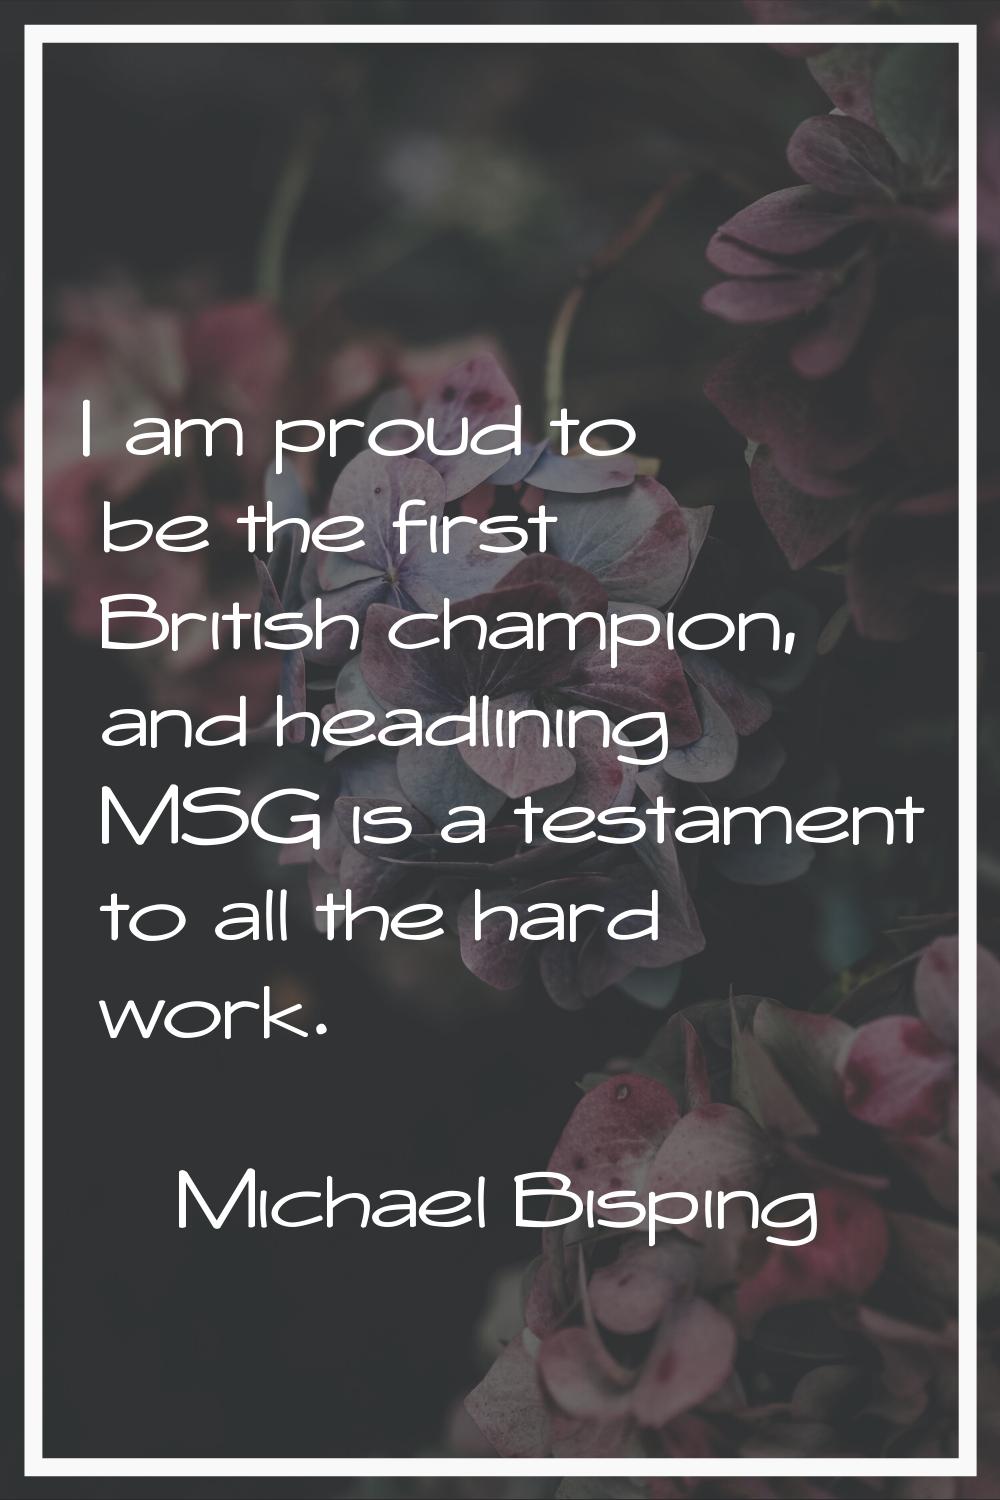 I am proud to be the first British champion, and headlining MSG is a testament to all the hard work